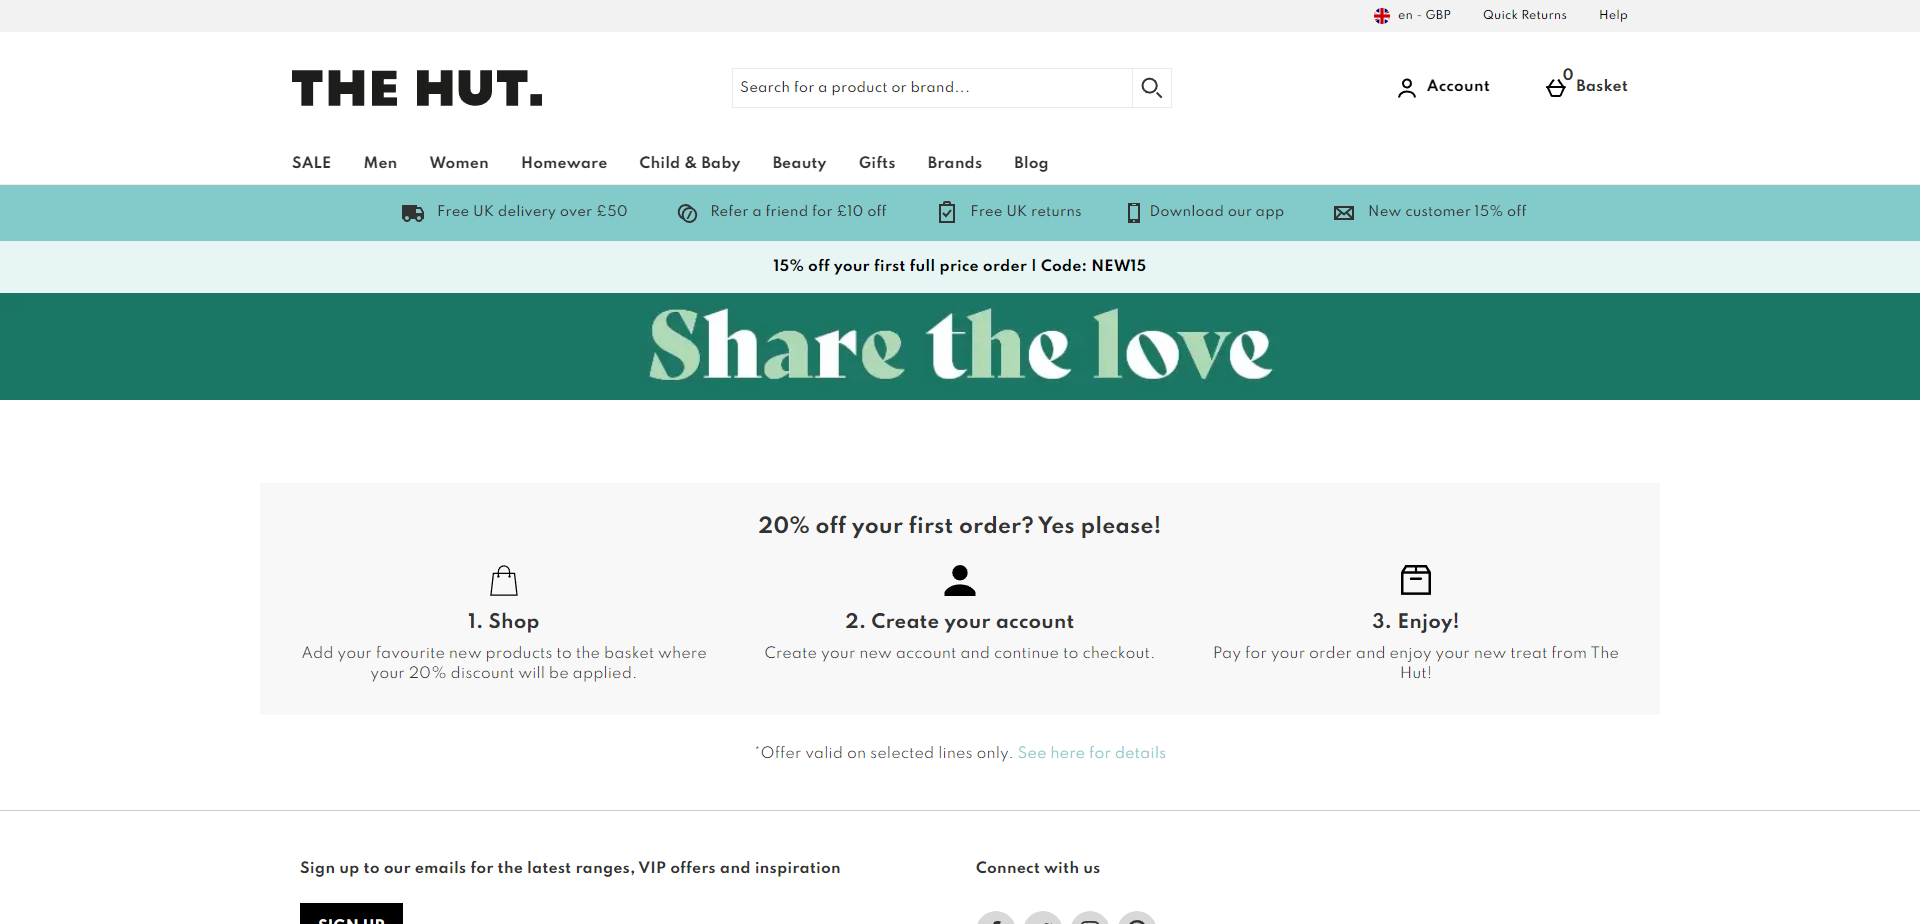 Landing Page for The Hut